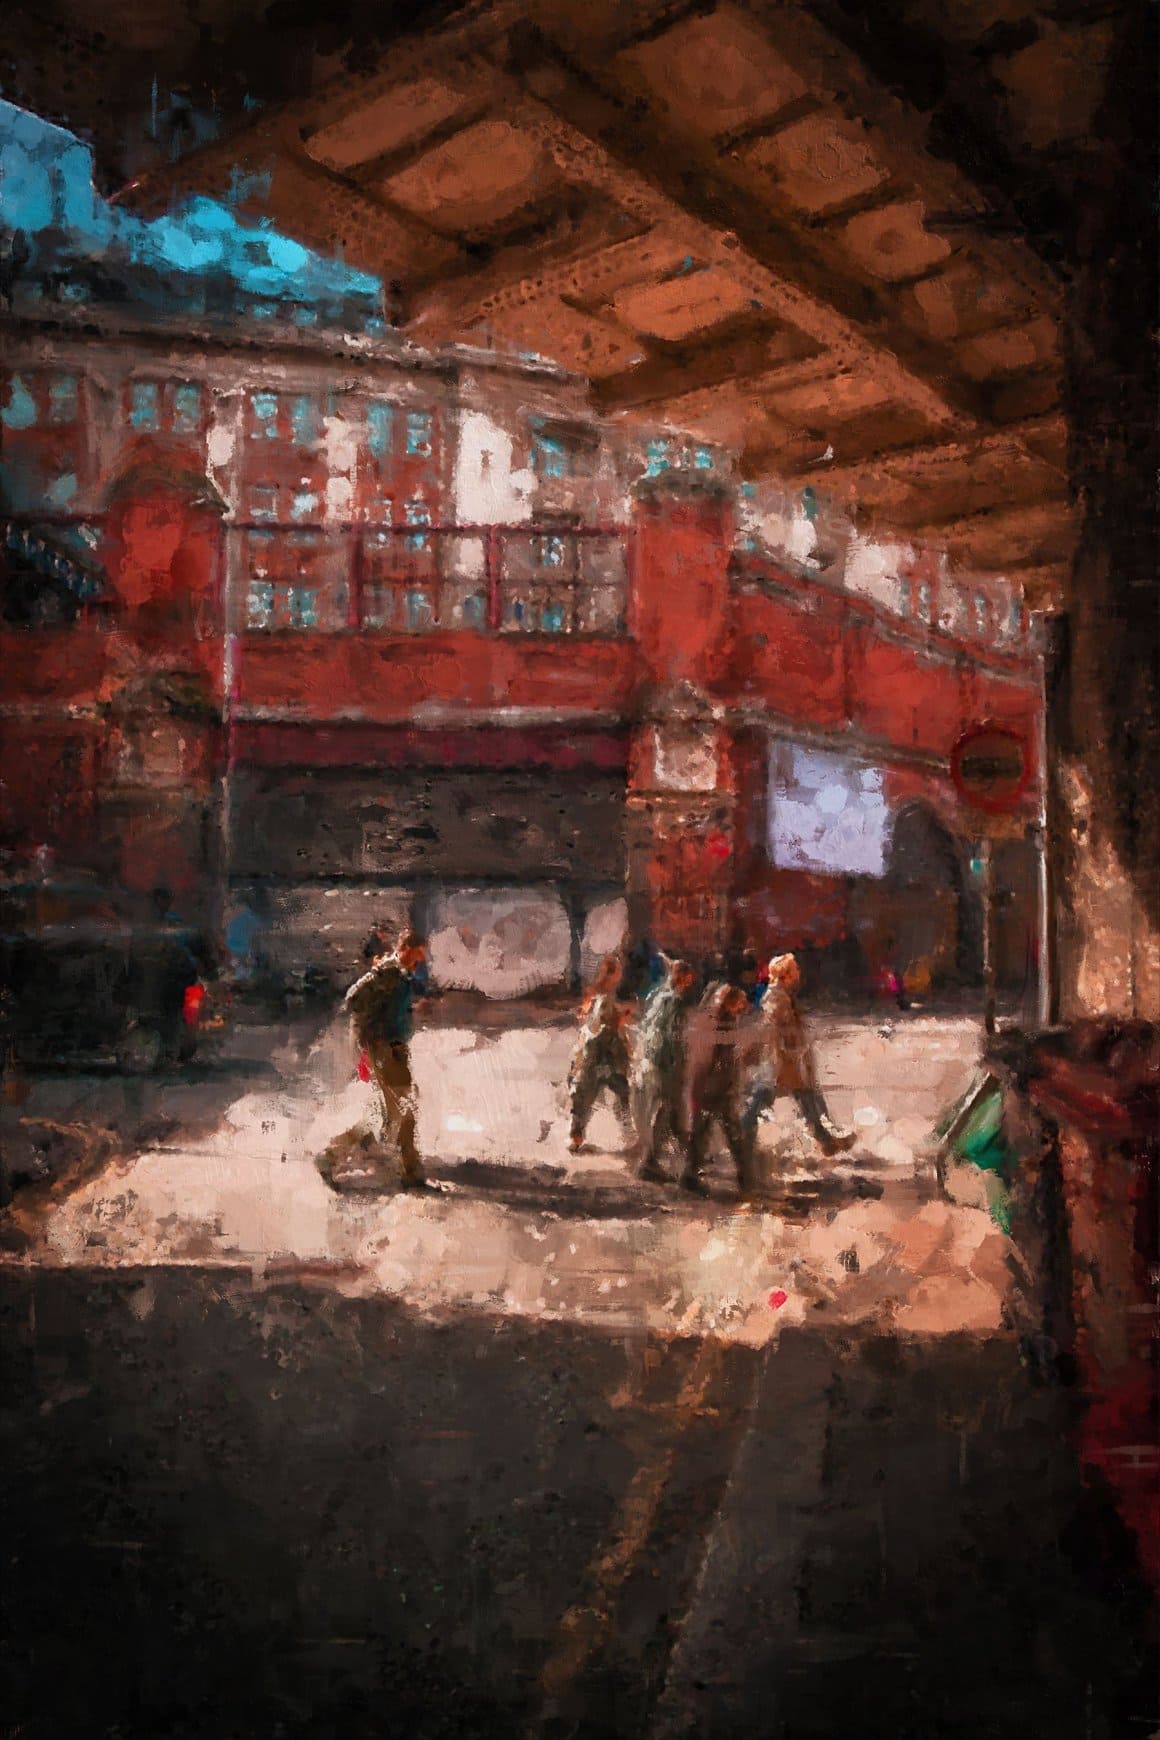 Image of townspeople crossing the street with a painted photoshop effect.